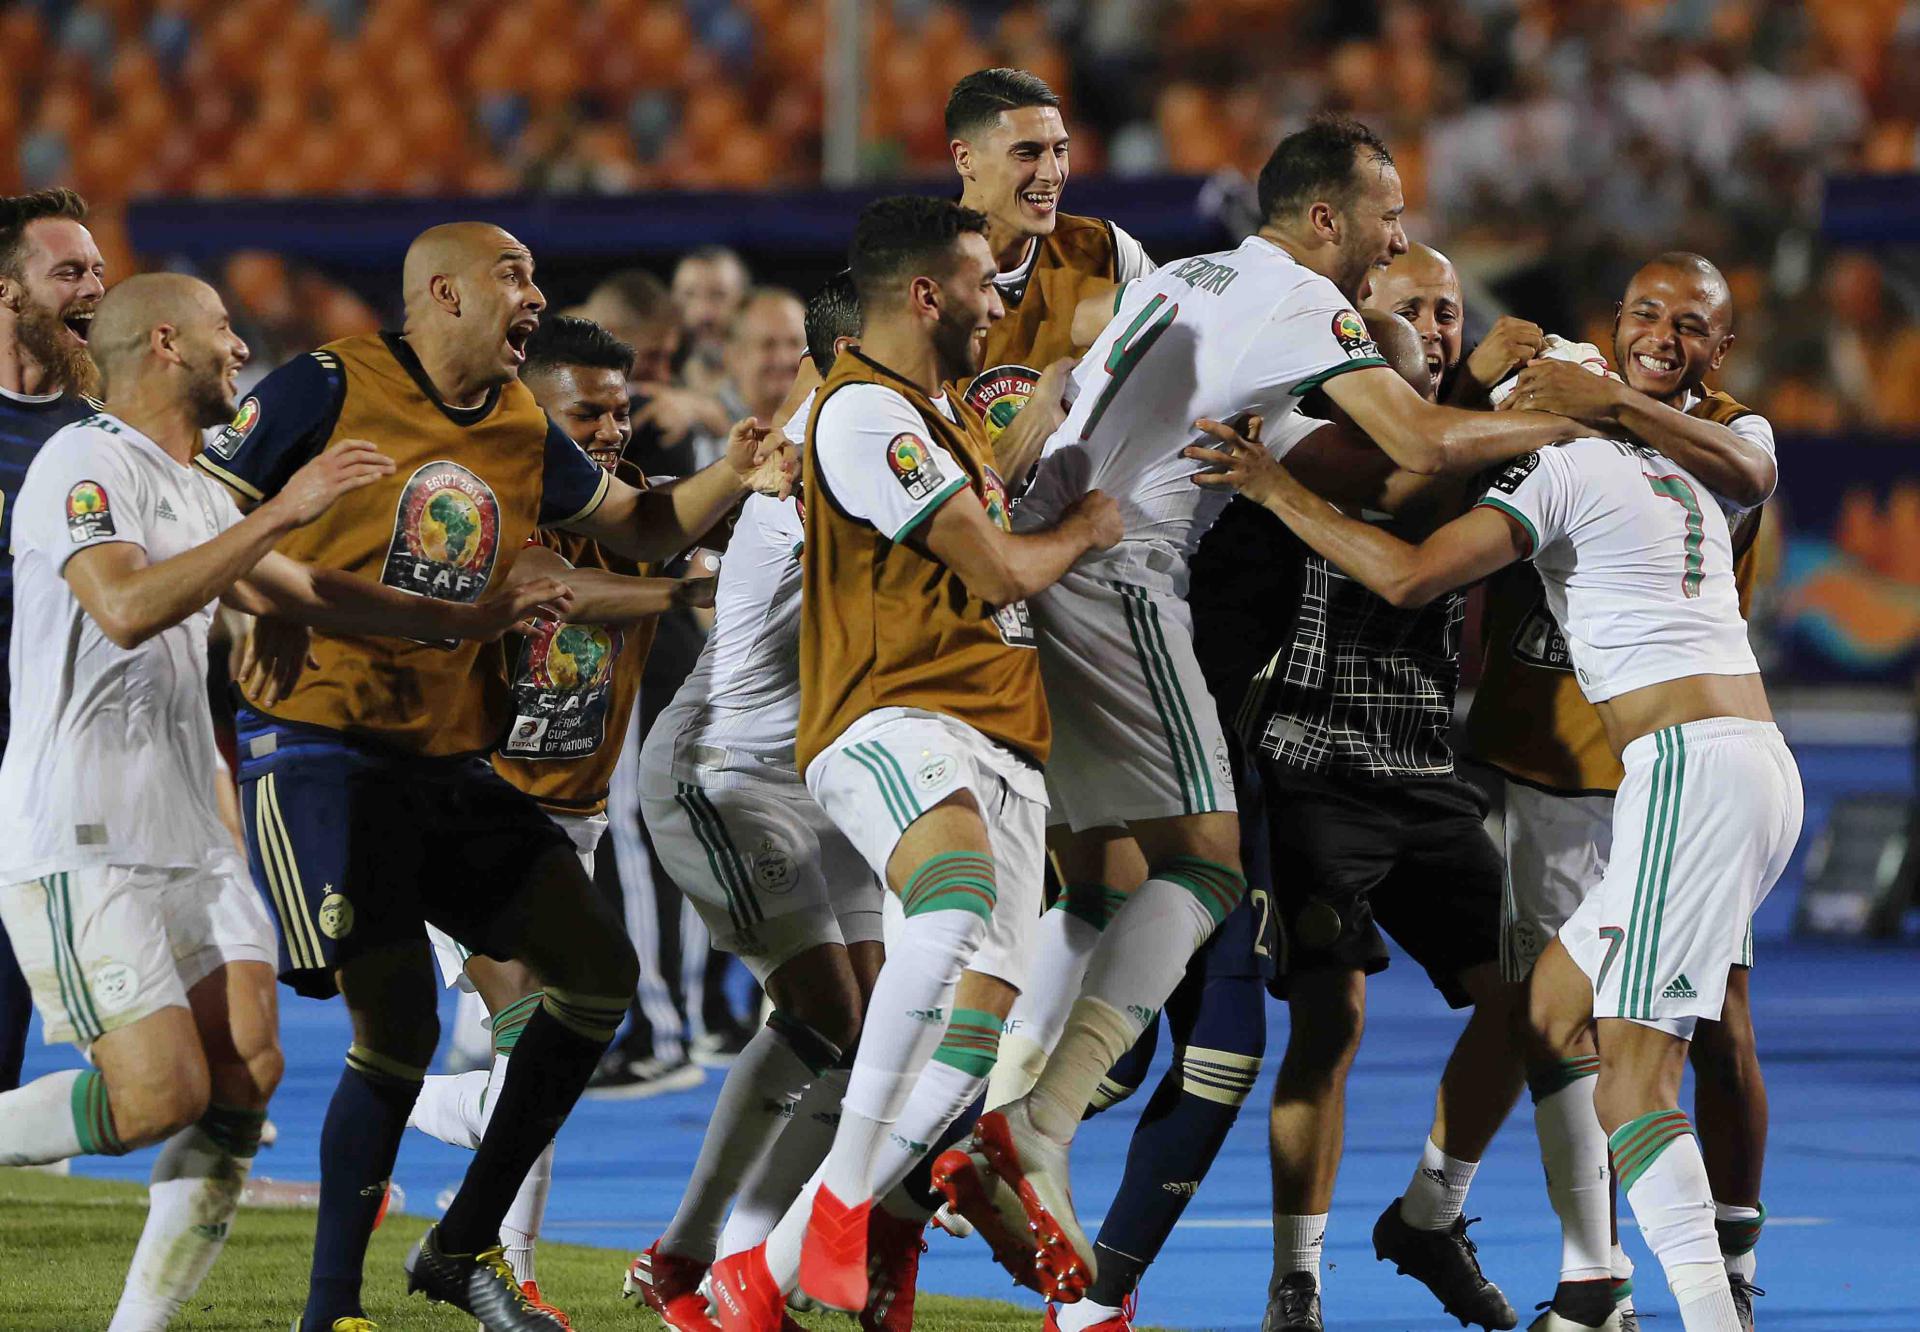 During the semi-finals, wounds were pricked again after Algerians and Egyptians traded a war of words and shoved each other 